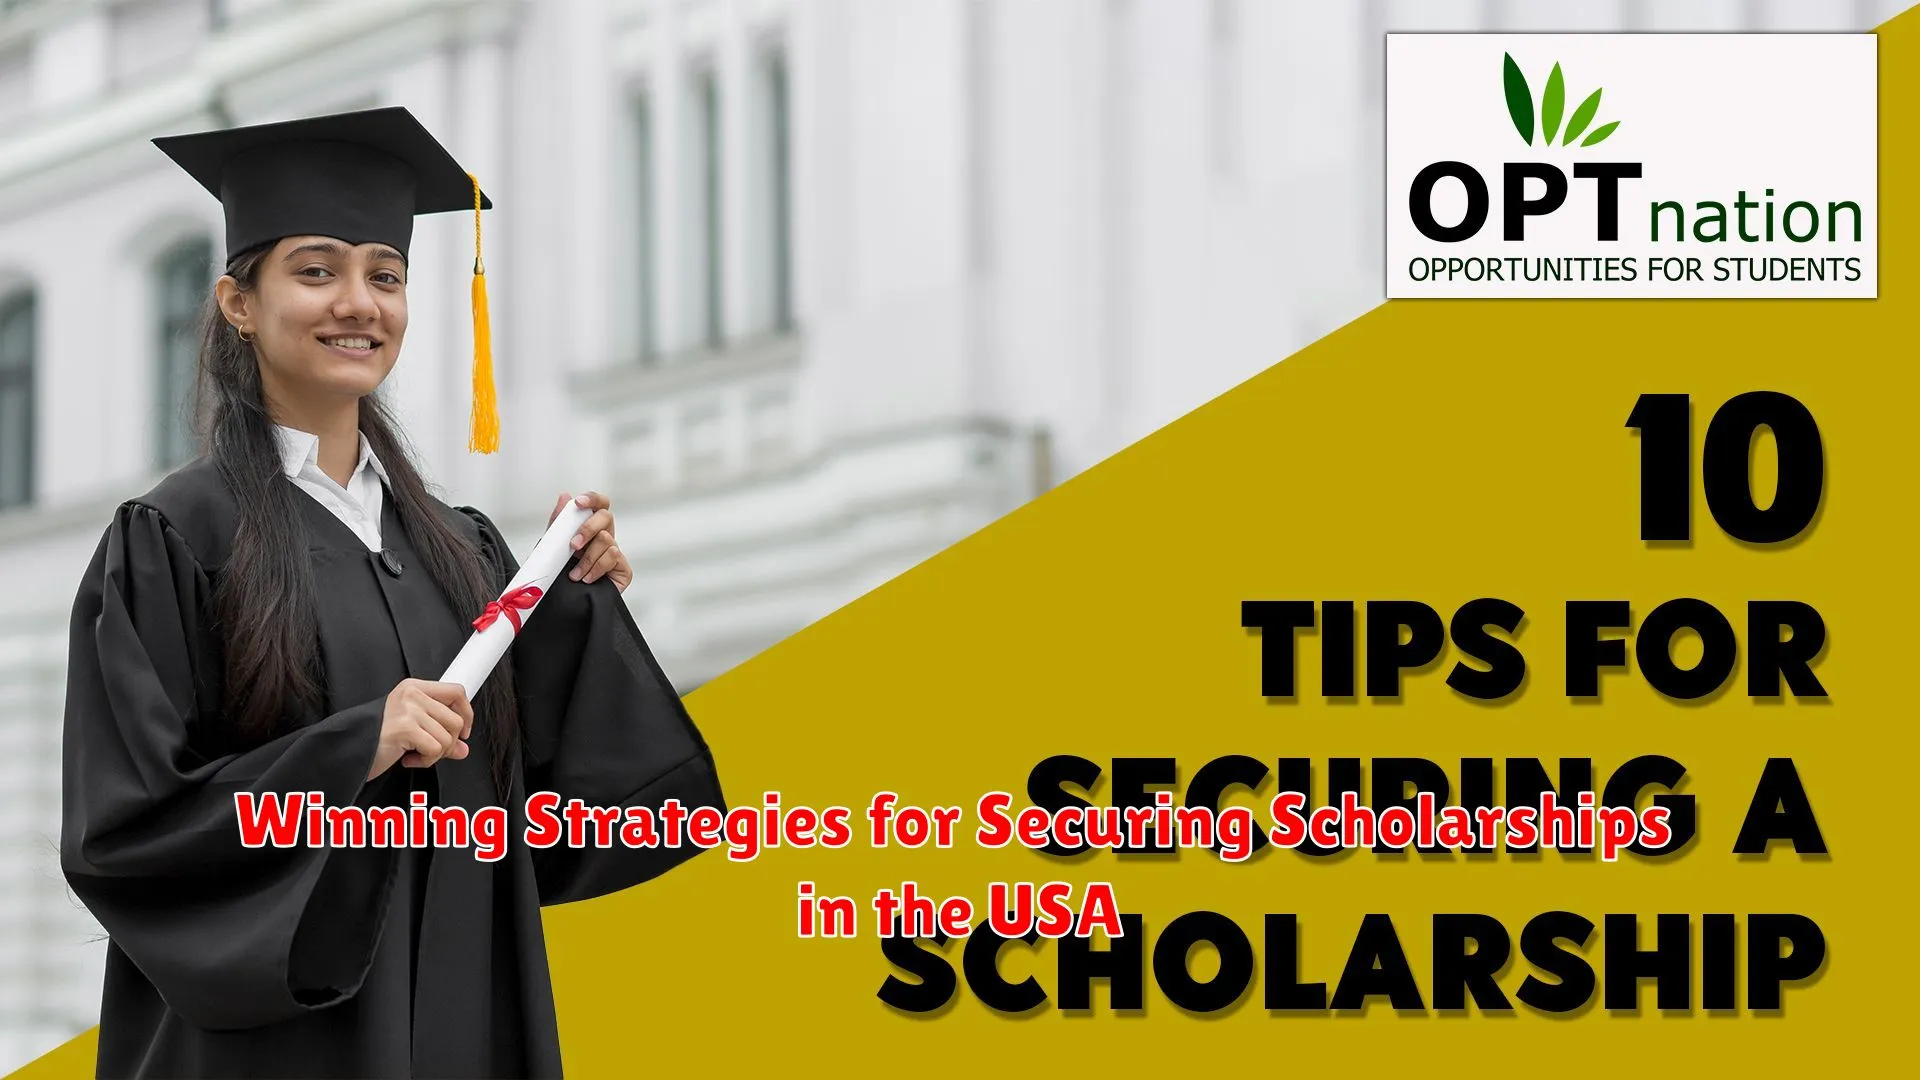 Winning Strategies for Securing Scholarships in the USA